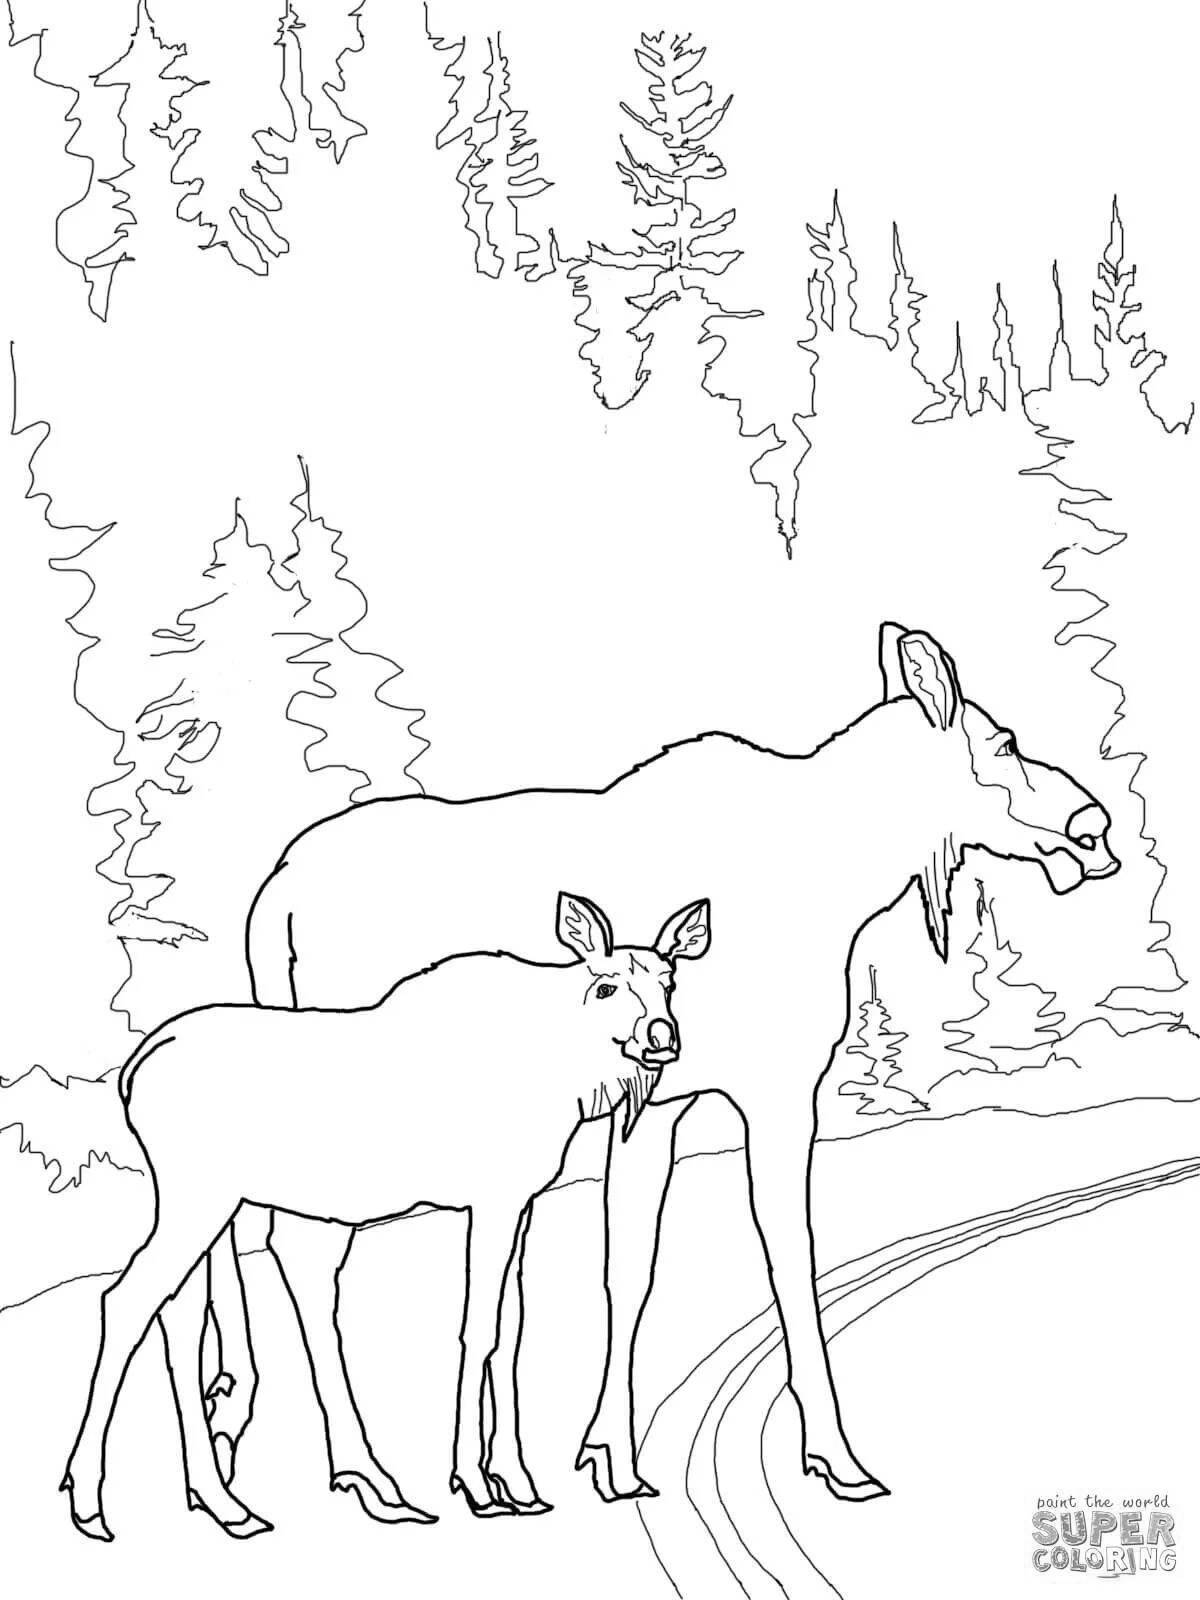 Coloring page idyllic winter forest with animals